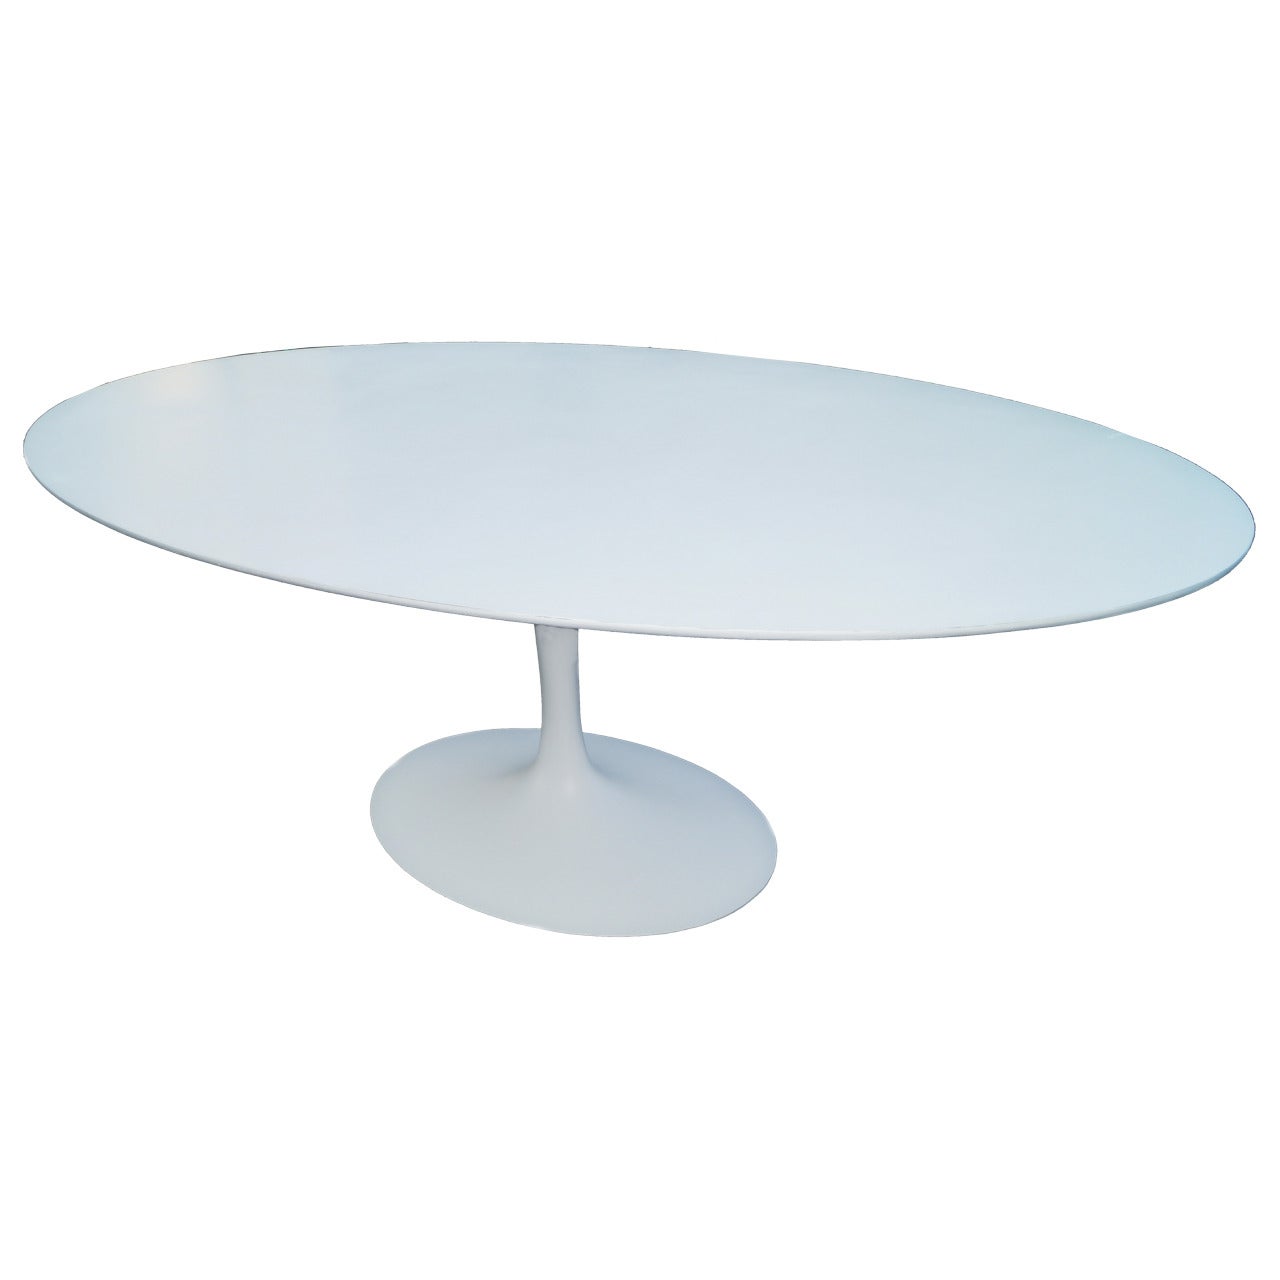 Mid-Century Modern Saarinen Knoll Tulip Oblong Dining or Conference Table, 1963